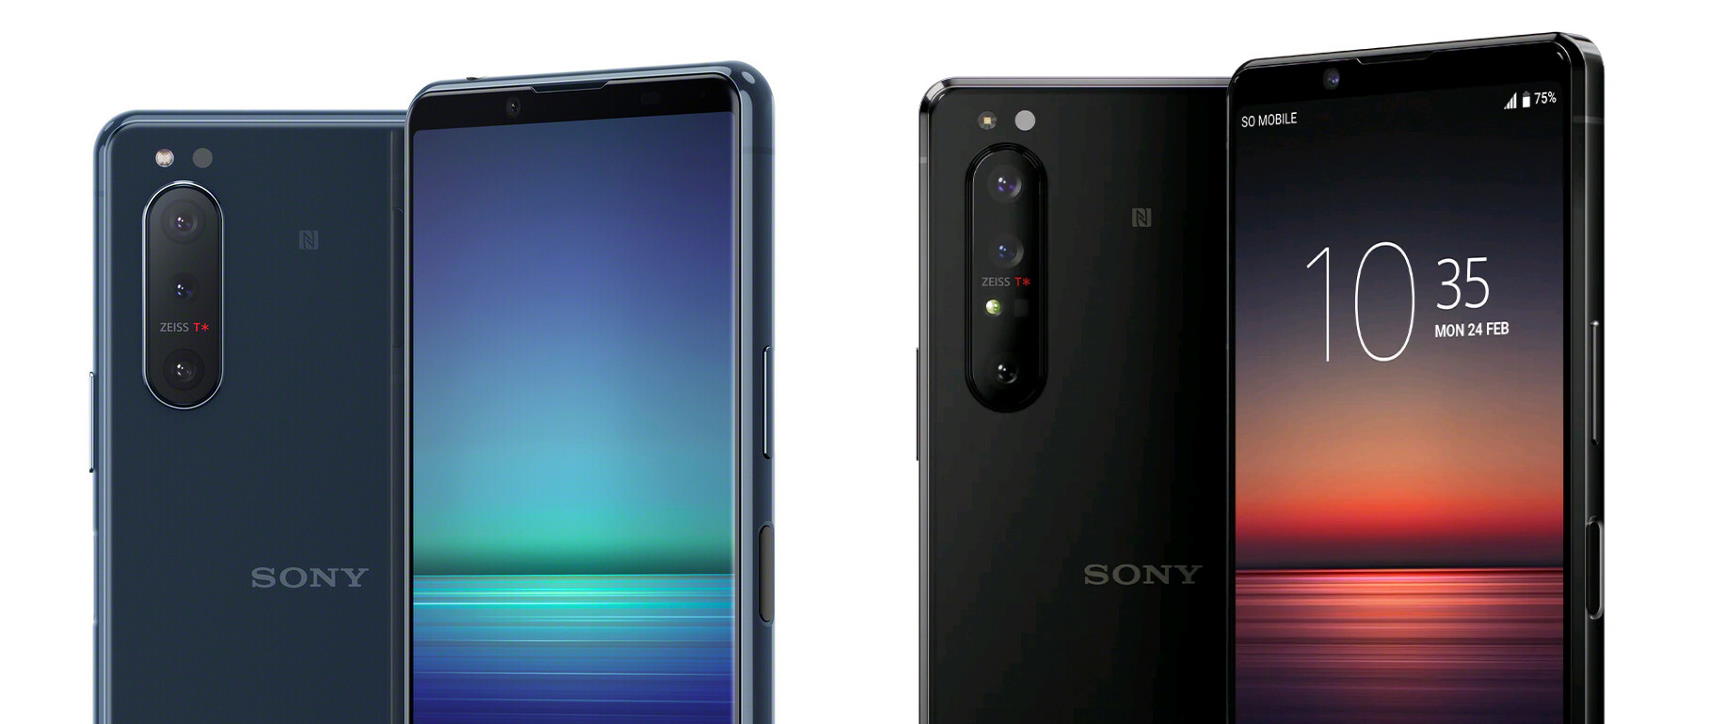 The Sony Xperia 1 II and Xperia 5 II will receive three OS upgrades; no